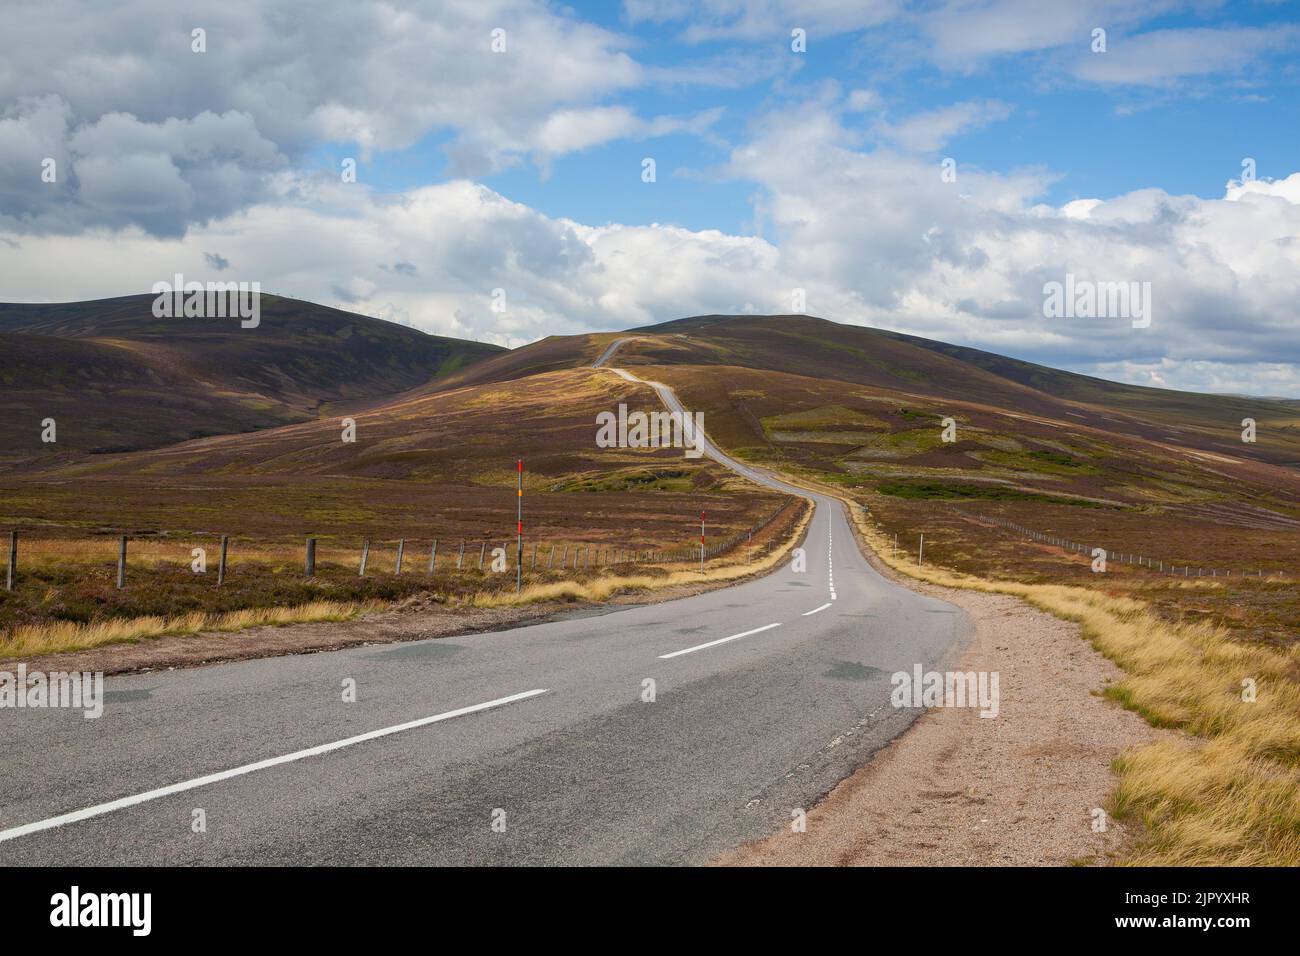 Amazing road in Cairnwell Pass  in the Scottish Highlands, Scotland.Cairnwell Pass is located on the A93 road between Blairgowrie and Braemar. Stock Photo